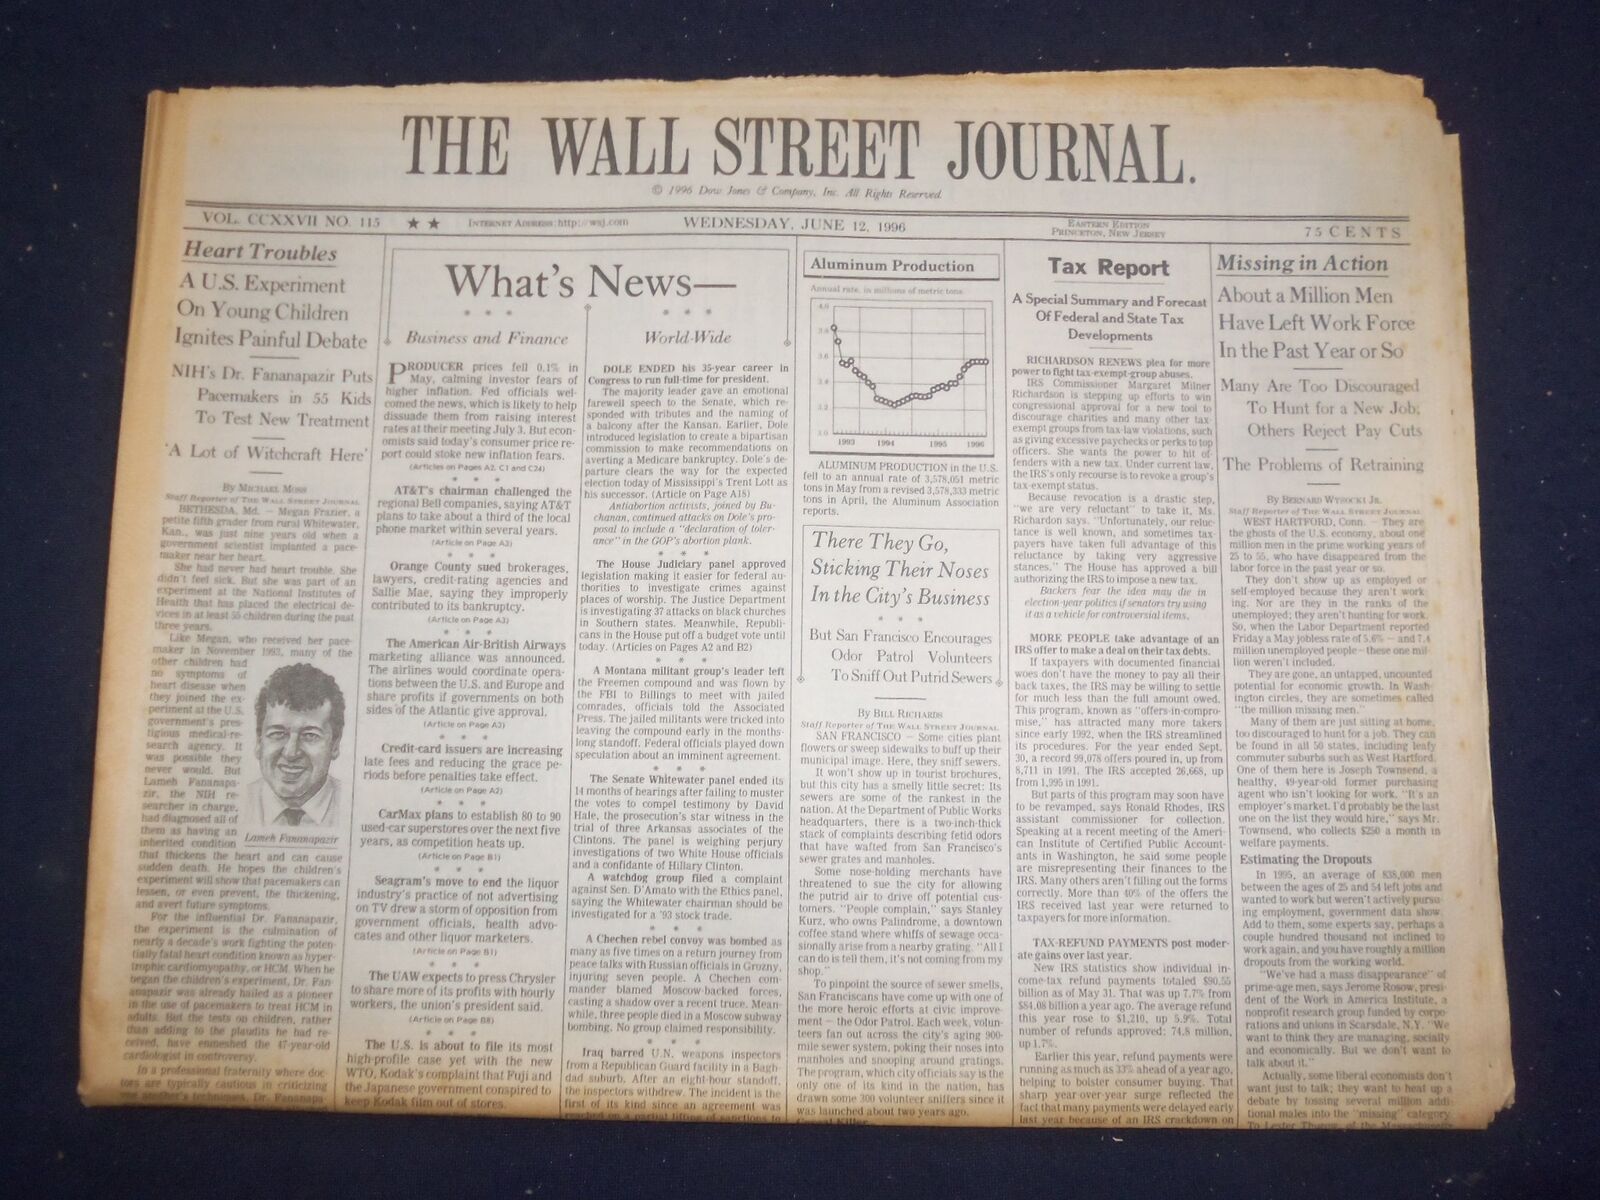 1996 JUNE 12 THE WALL STREET JOURNAL-DR. FANANAPAZIR PACEMAKERS IN KIDS - WJ 391